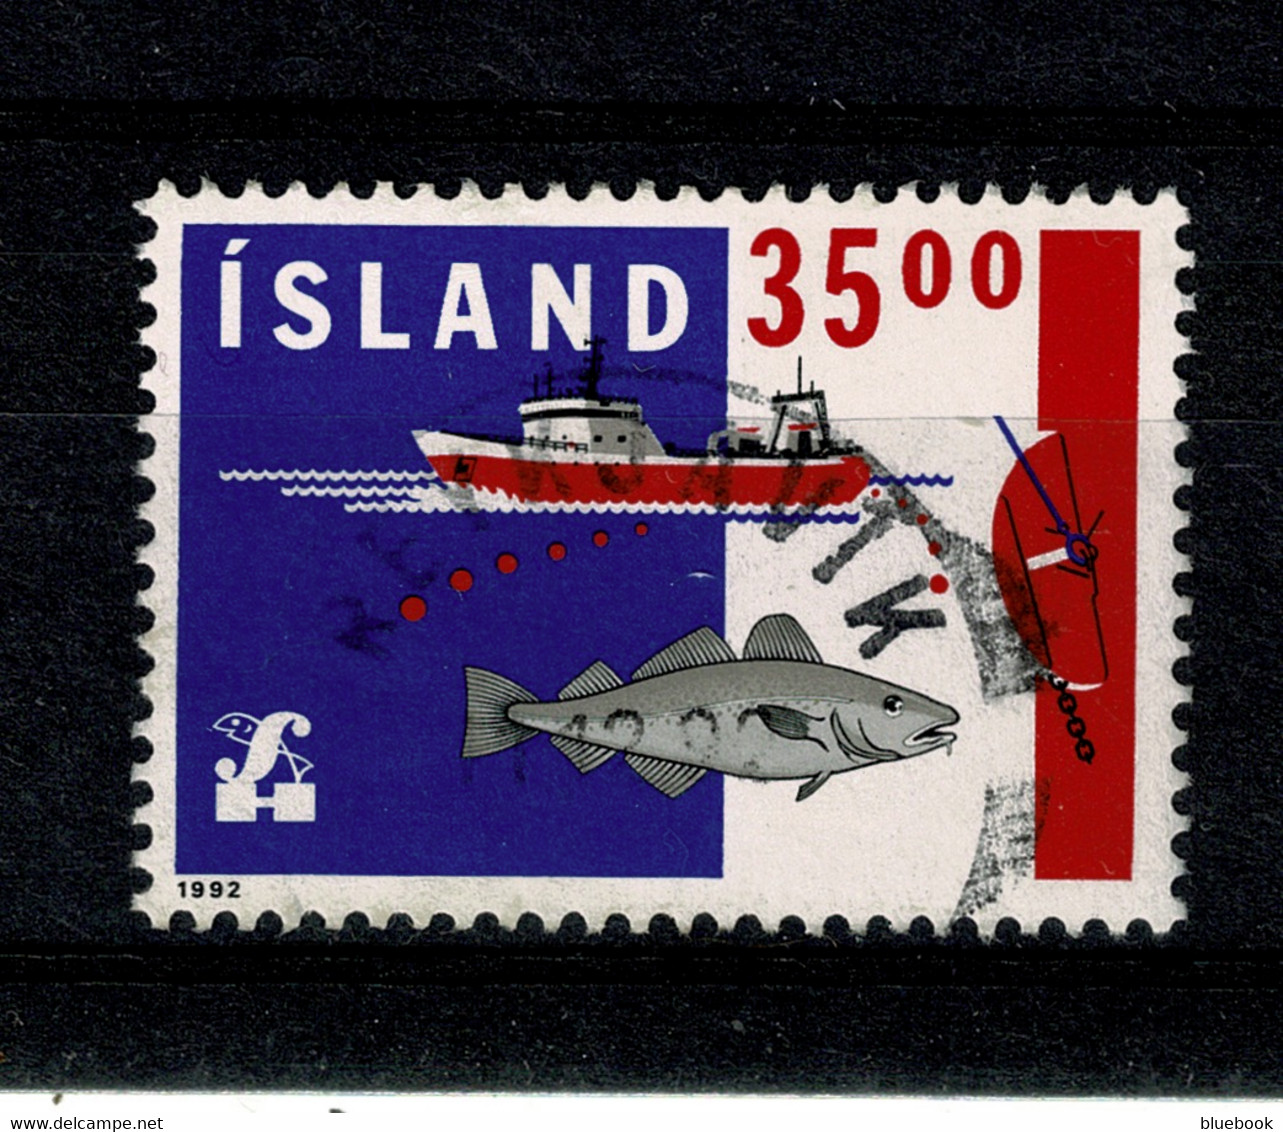 Ref 1451 - 1992 Iceland - 55k Camber Of Commerce - Trawler Ship - Used Stamp - SG 780 - Transport Theme - Usados